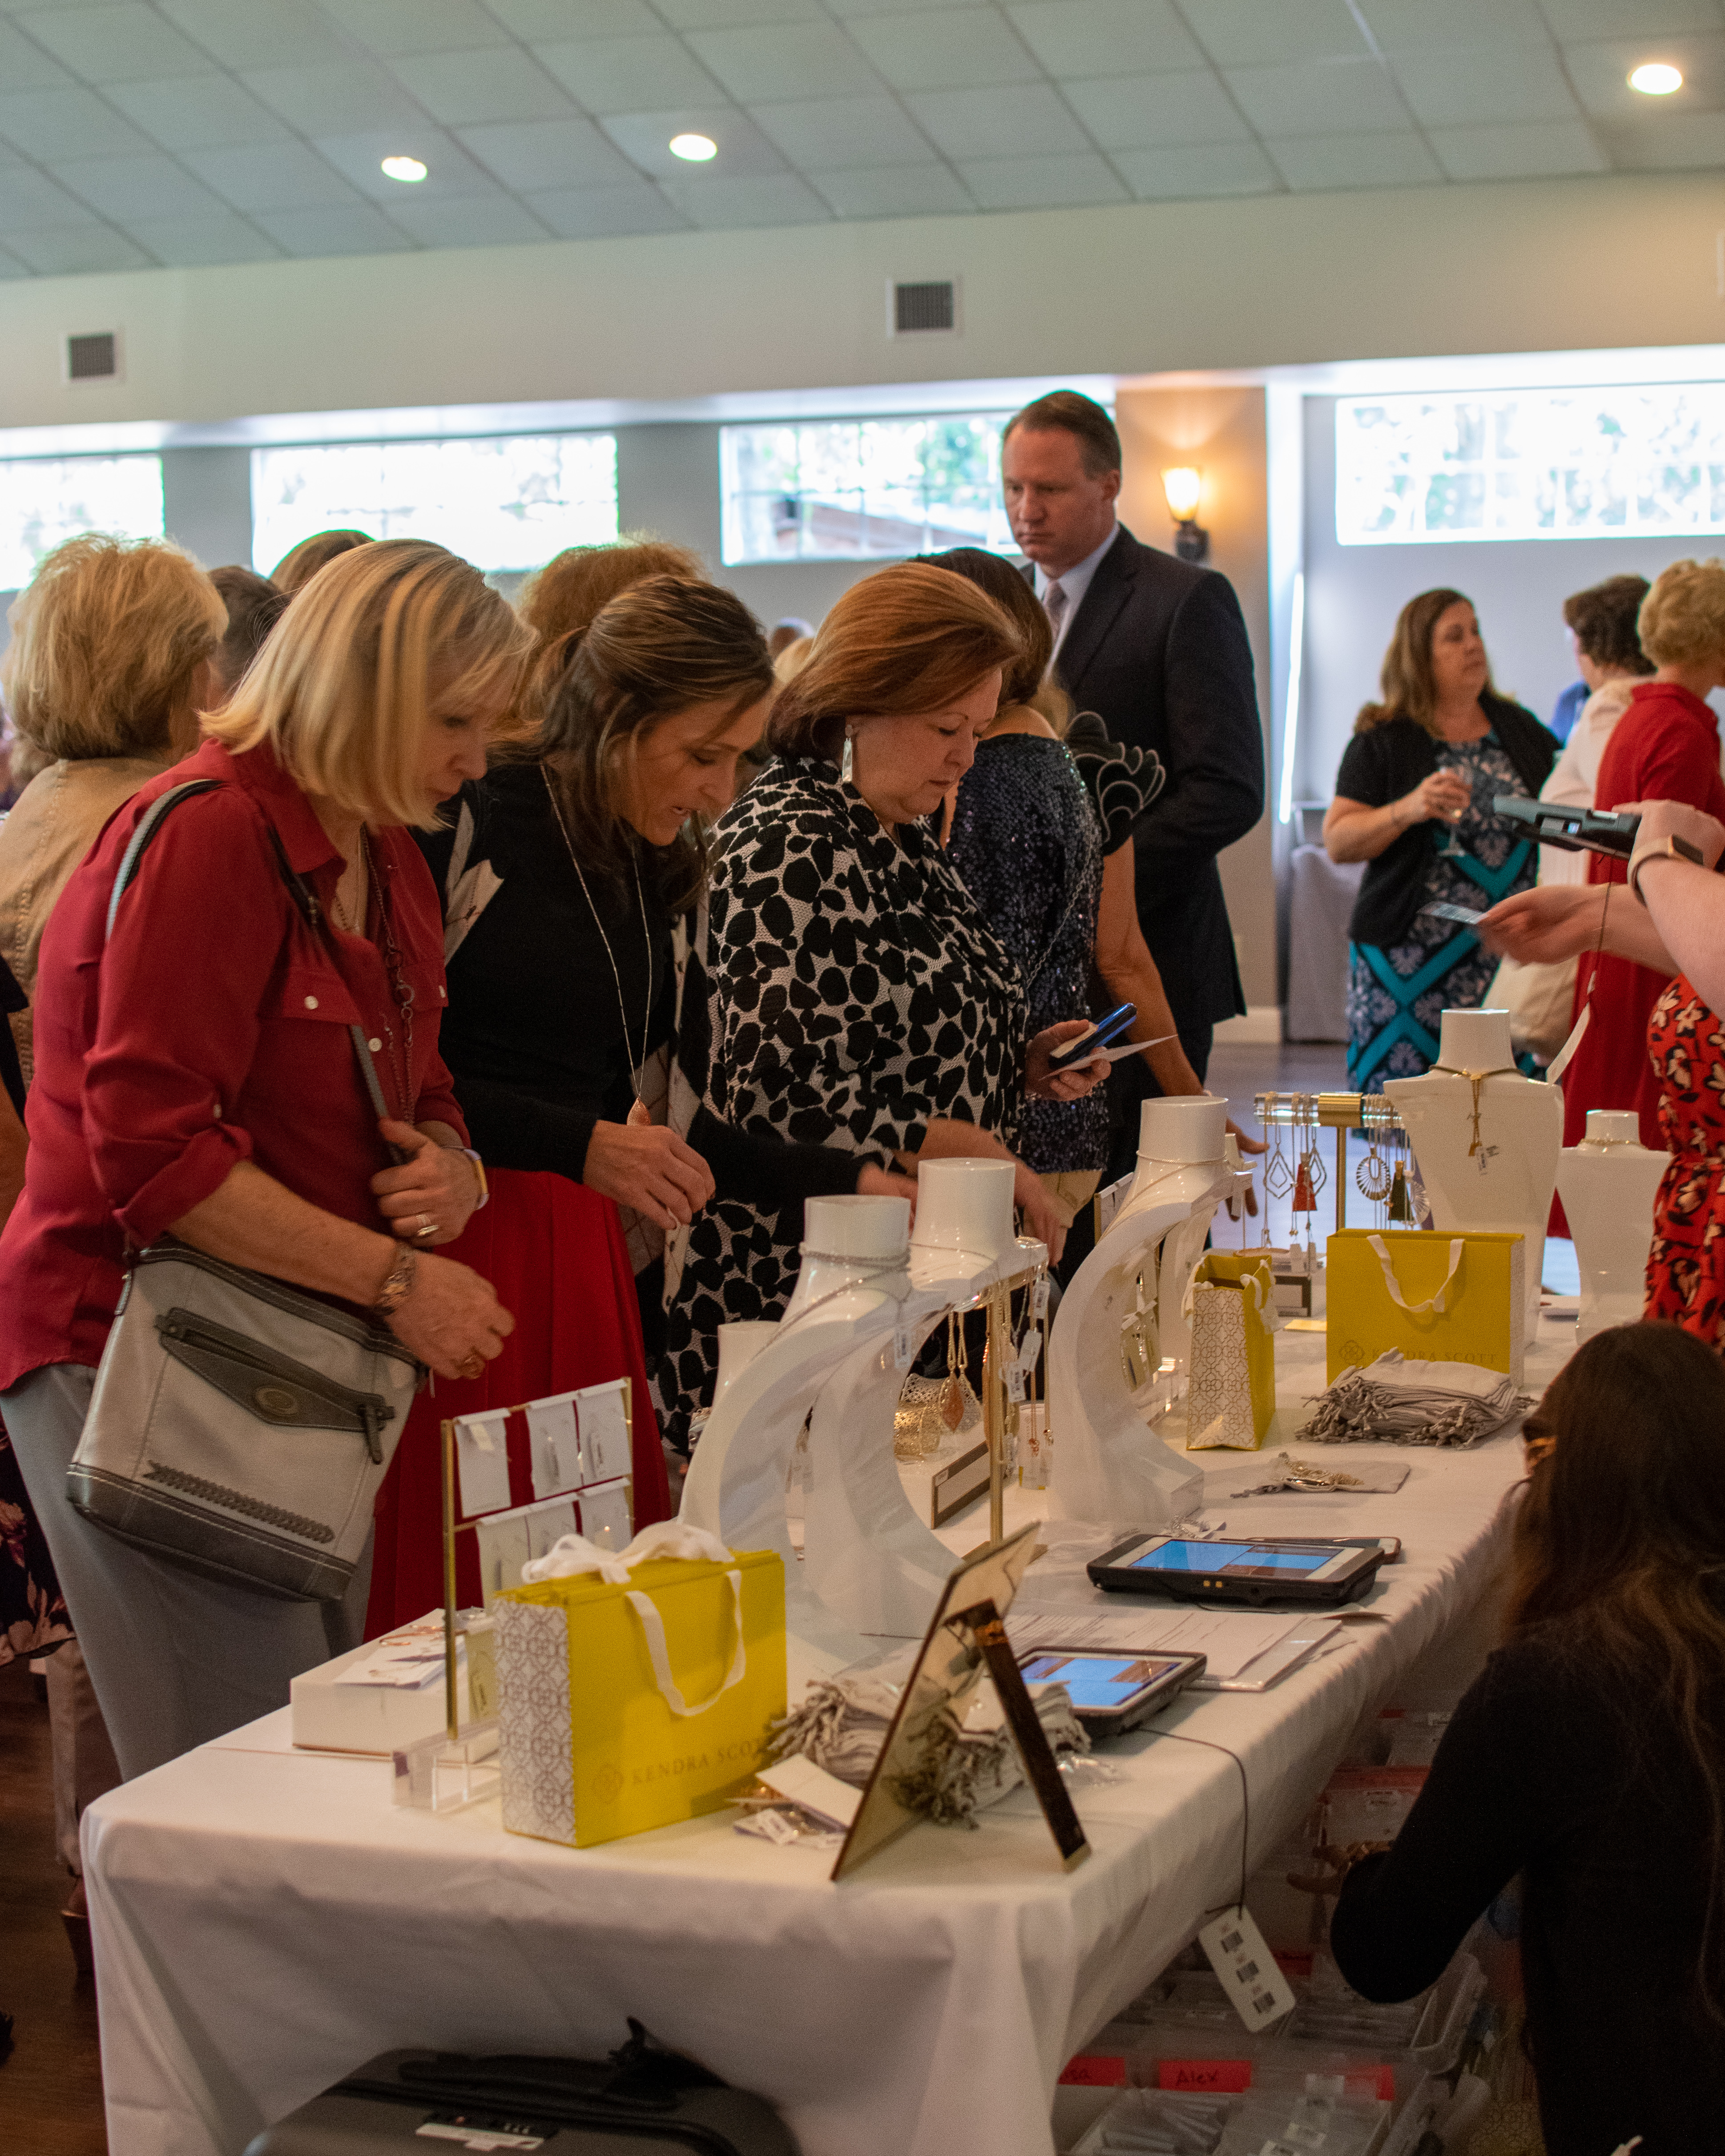 2019 Jeans & Jewels Luncheon Honors Donna Asbill and raises nearly $70,000